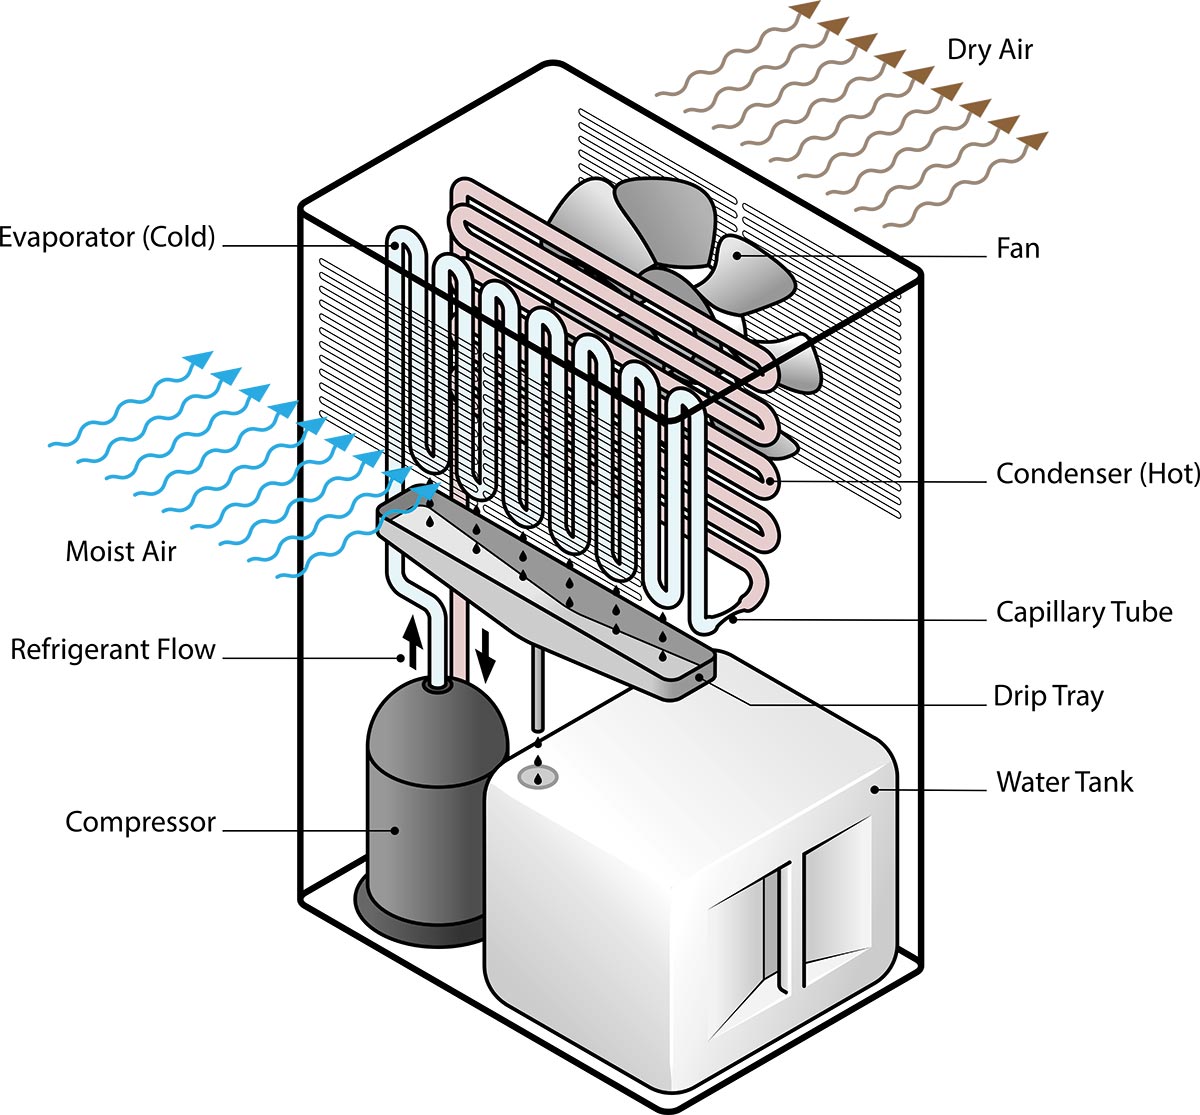 whole-house-dehumidification-systems-james-river-air-conditioning-company